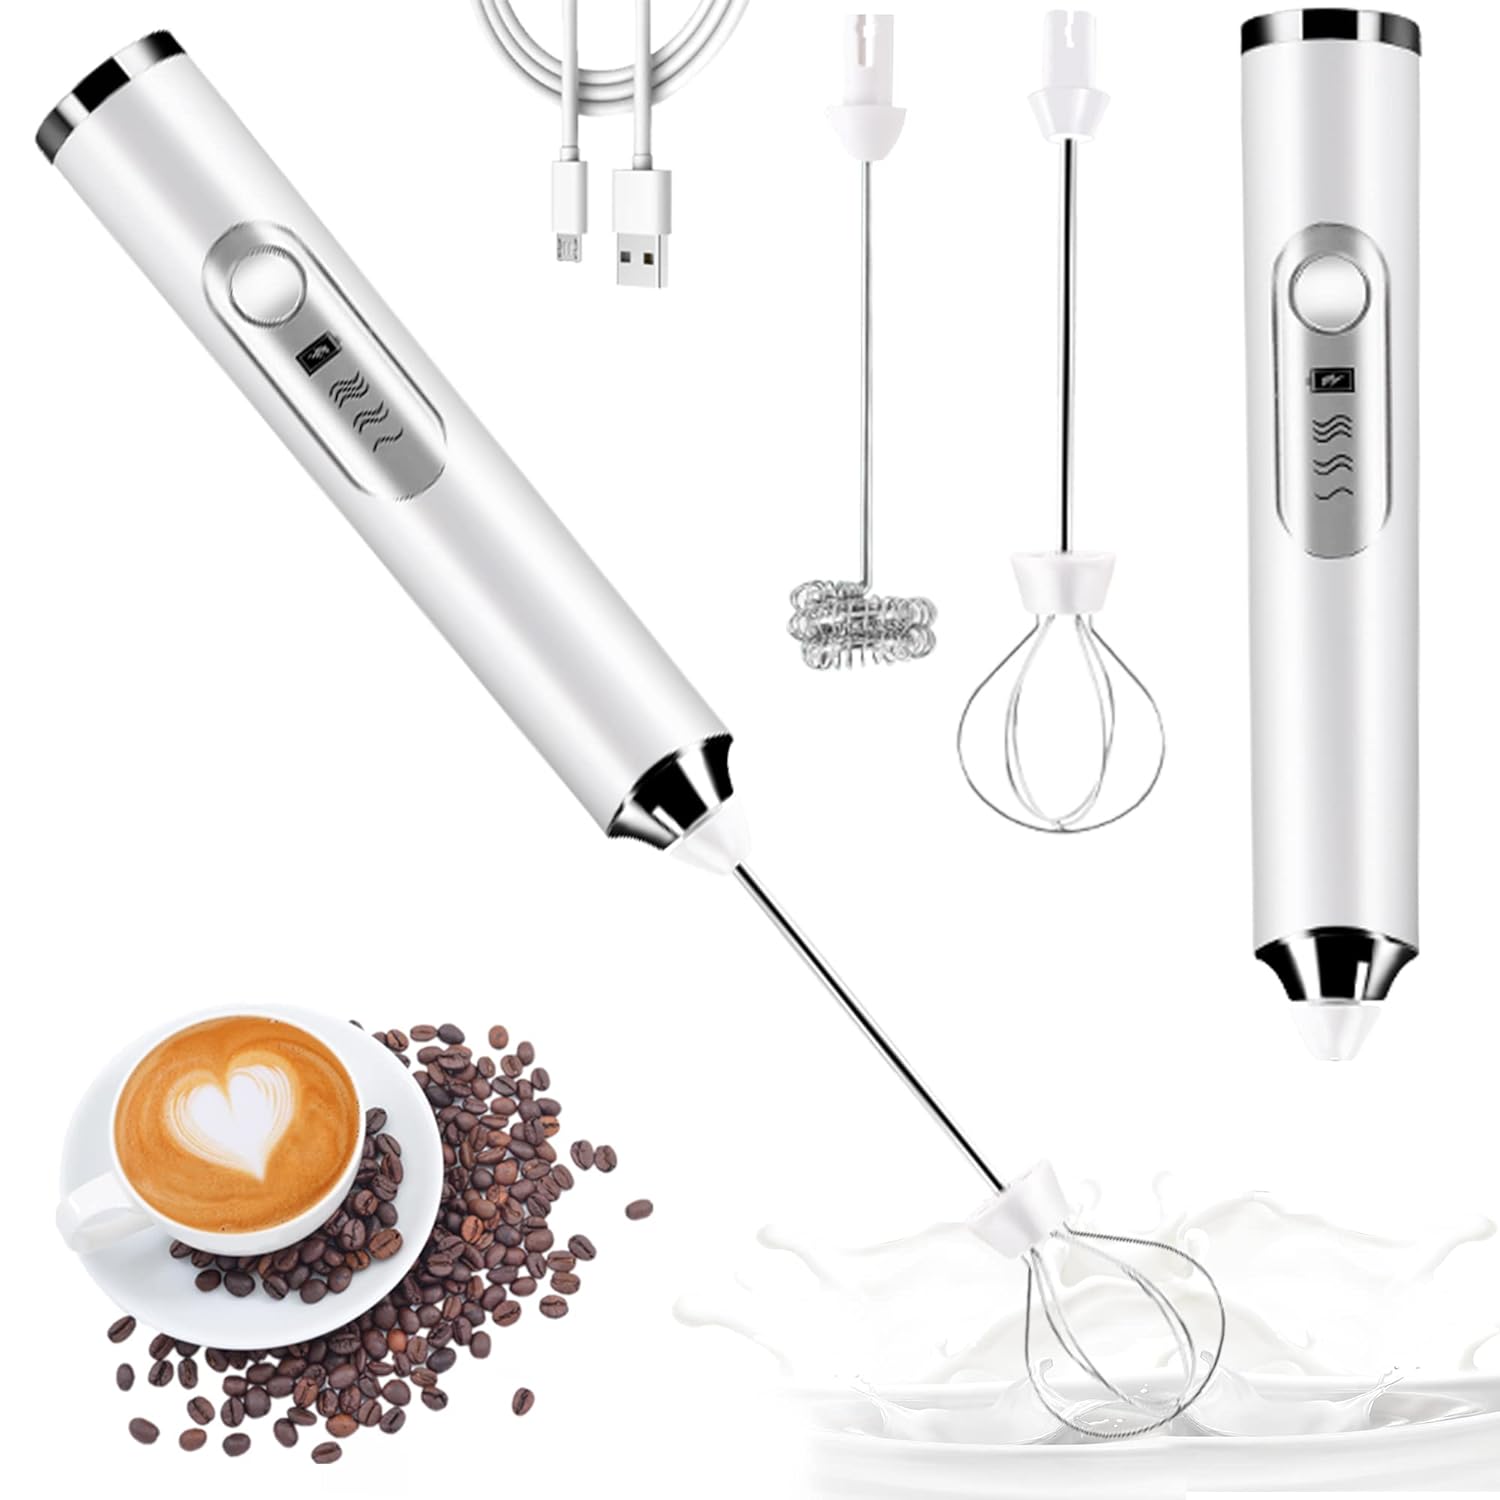 Milk Frother Handheld USB Rechargeable Milk Foam Maker with 2 Stainless Whisks, Mini Blender Mixer 3 Speeds Adjustable for Coffee, Latte, Cappuccino, Matcha, Hot Chocolate, Egg, White